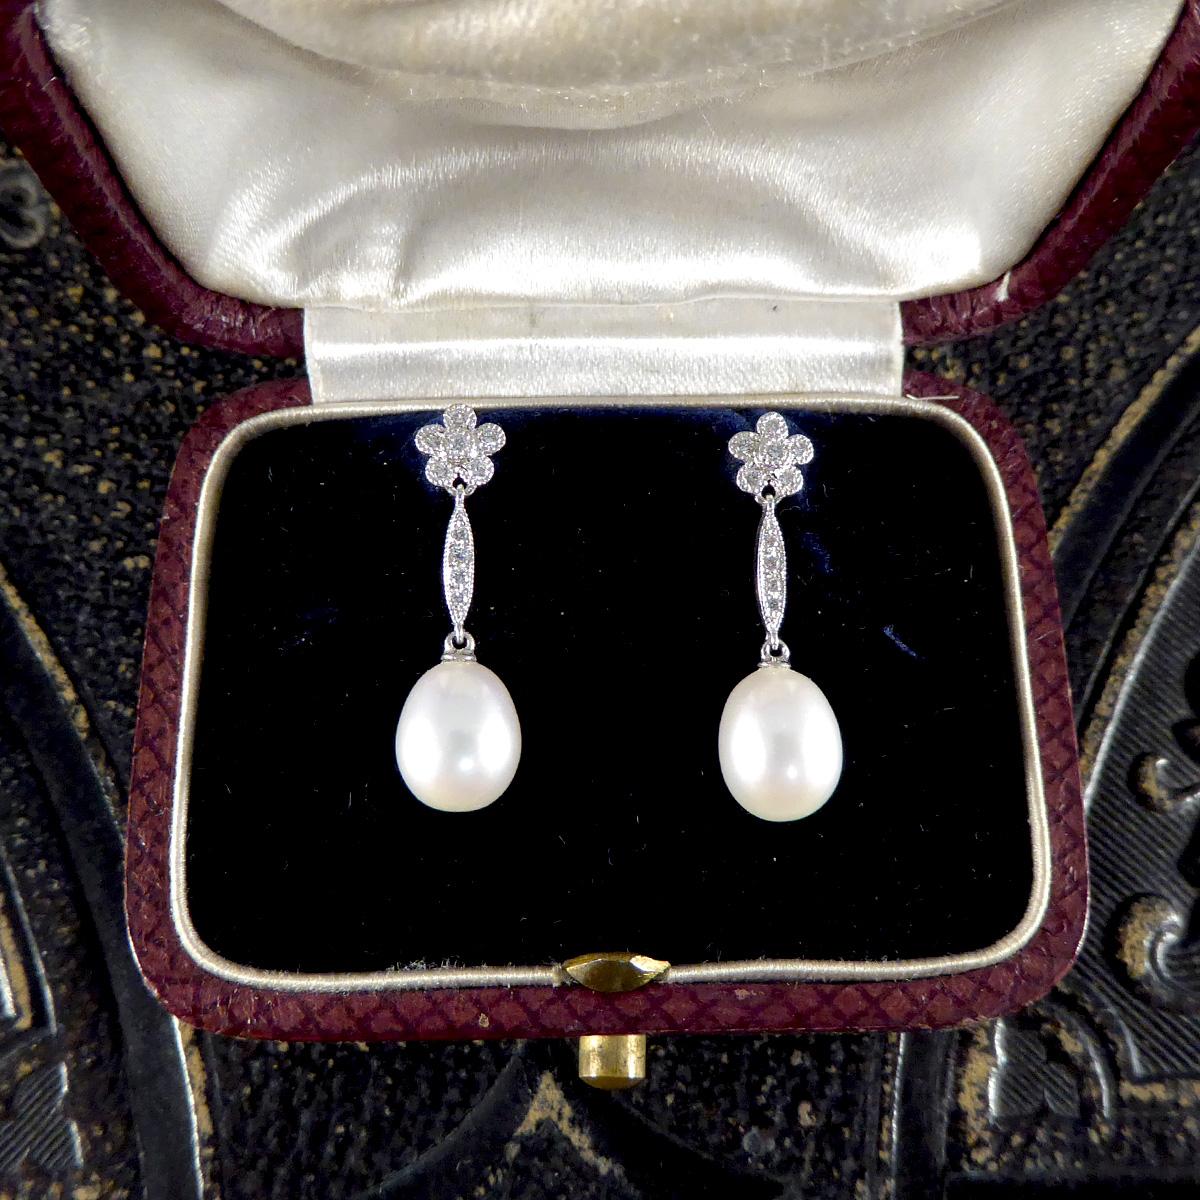 This beautiful pair of earrings have been delicately hand crafted to resemble an Art Deco period piece. Set with Diamonds is a dainty and sweet Daisy cluster millegrian set giving it the most authentic period aesthetic in 18ct White Gold. Swinging